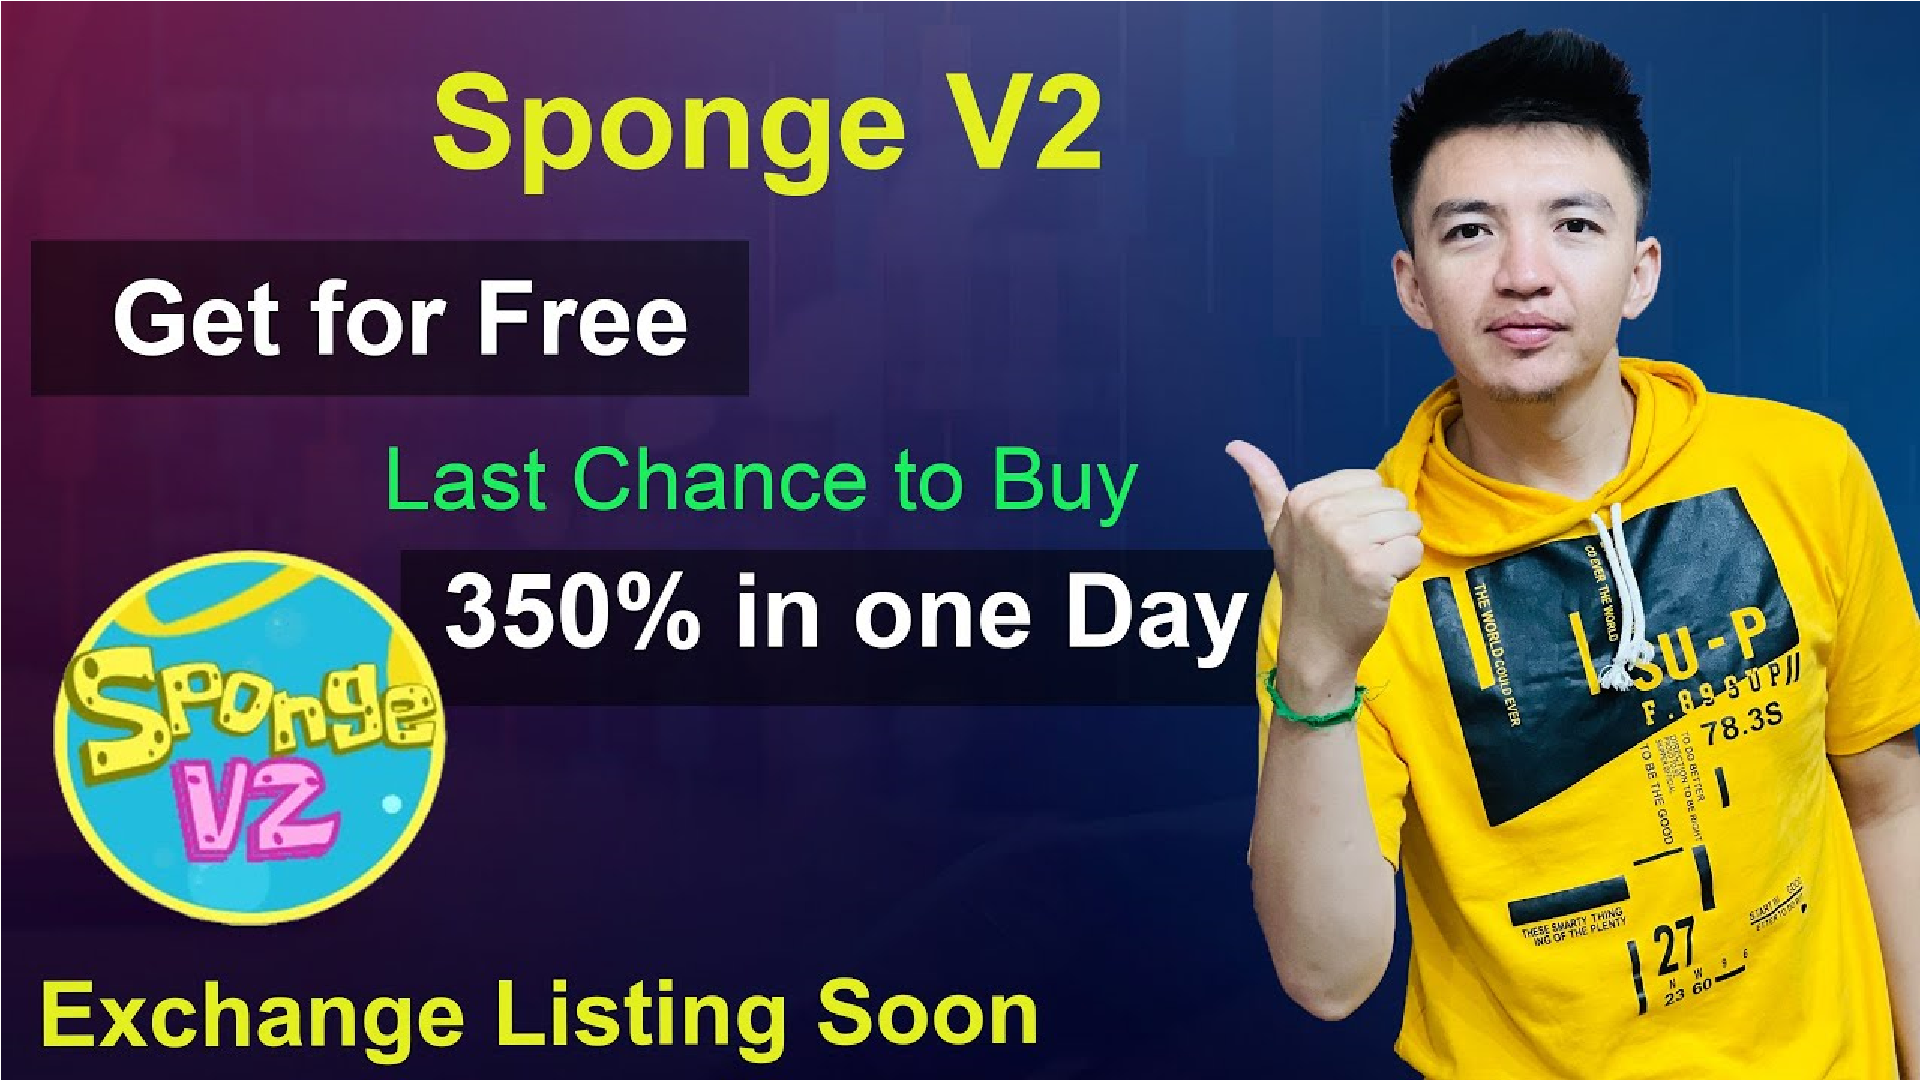 Crypto YouTuber Crypto Boy Provides Update on Sponge V2 Ahead of Its Upcoming Listing